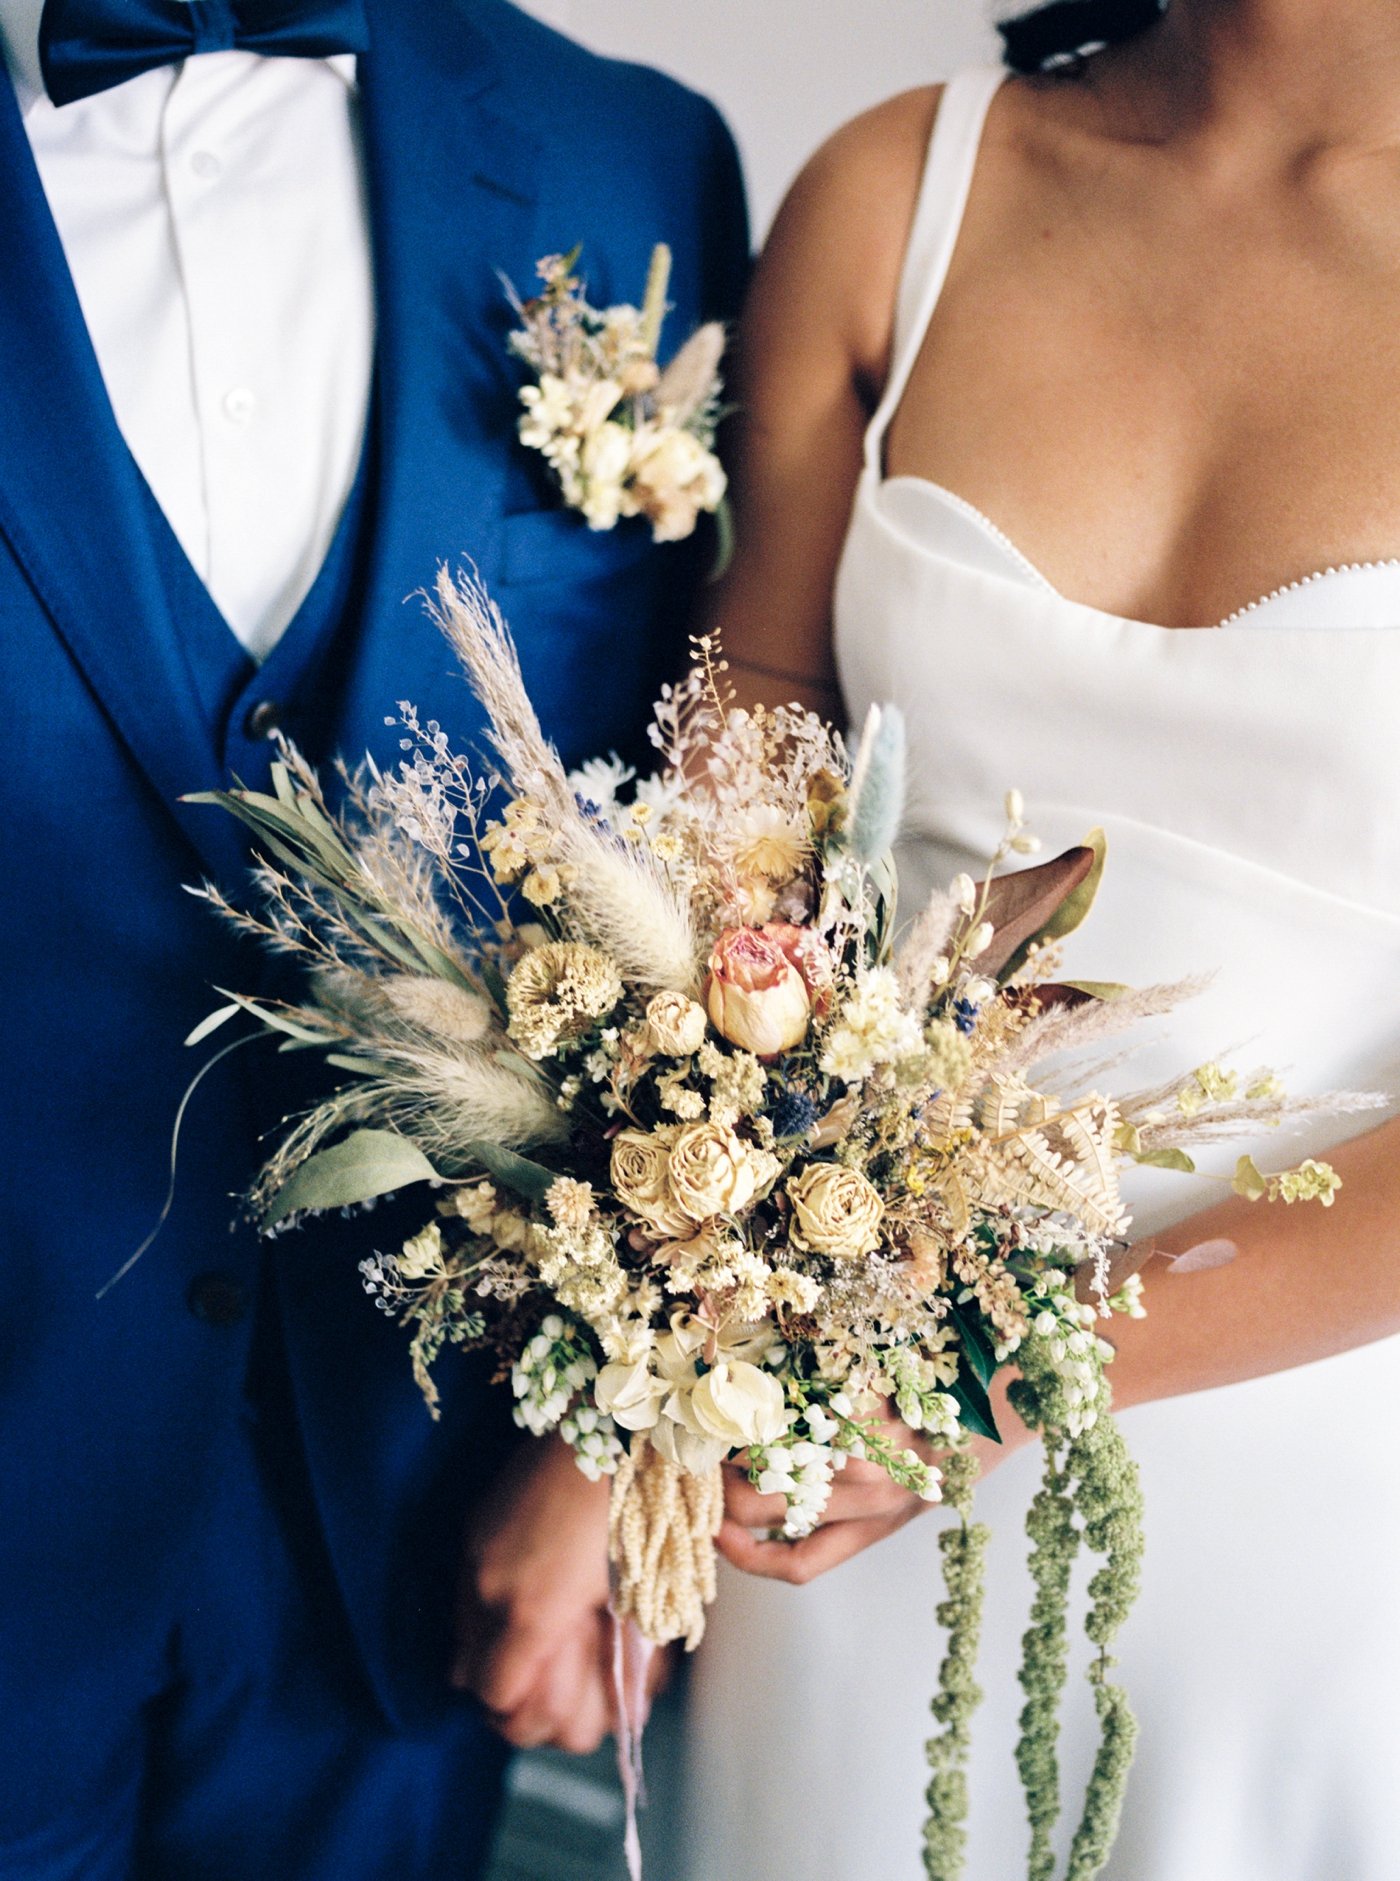 Bridal bouquet filled with dried roses and pampas grass